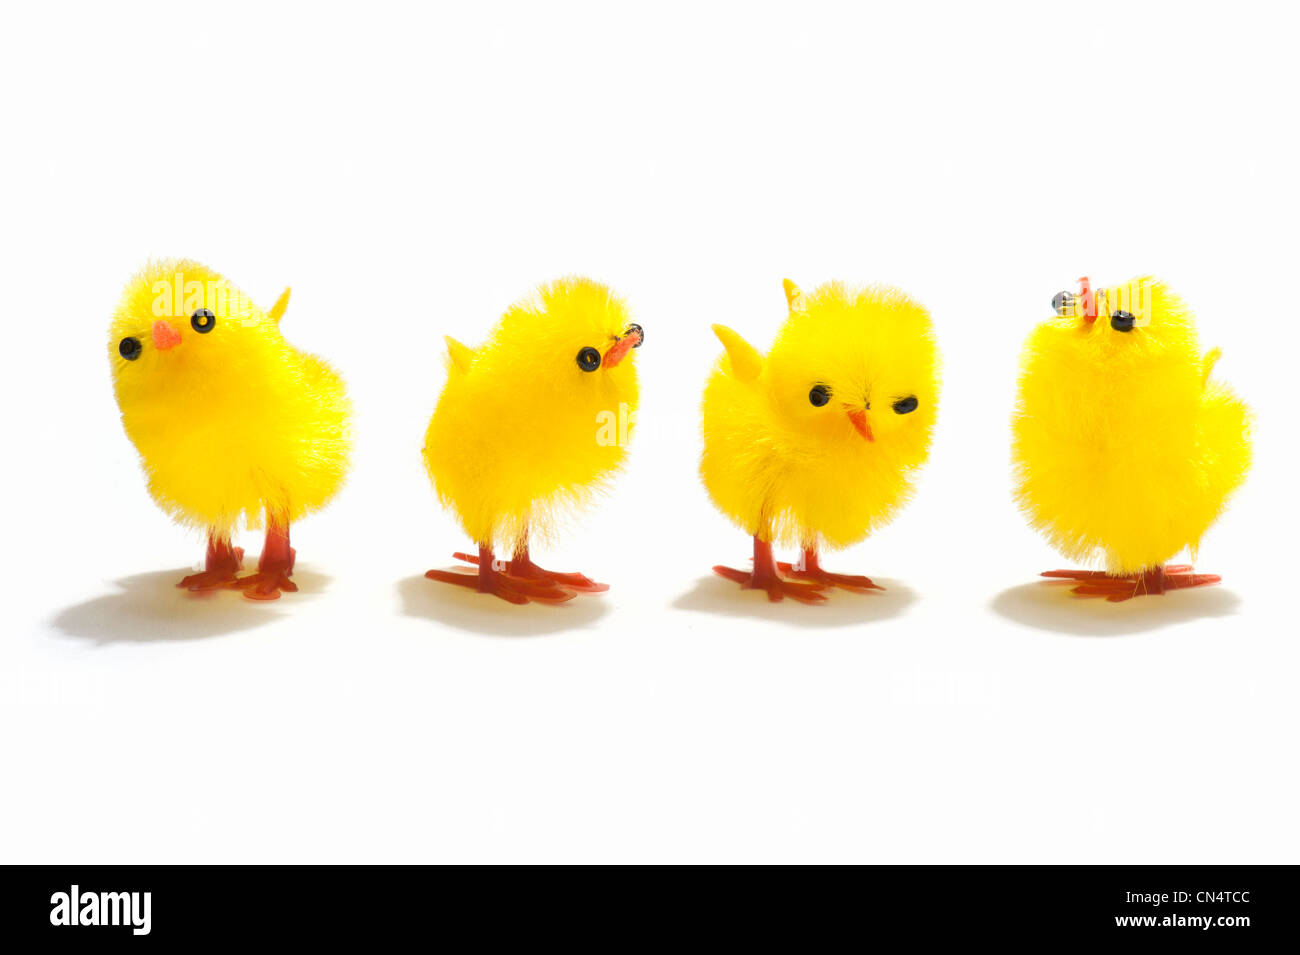 Four Easter chick decorations in a row Stock Photo - Alamy